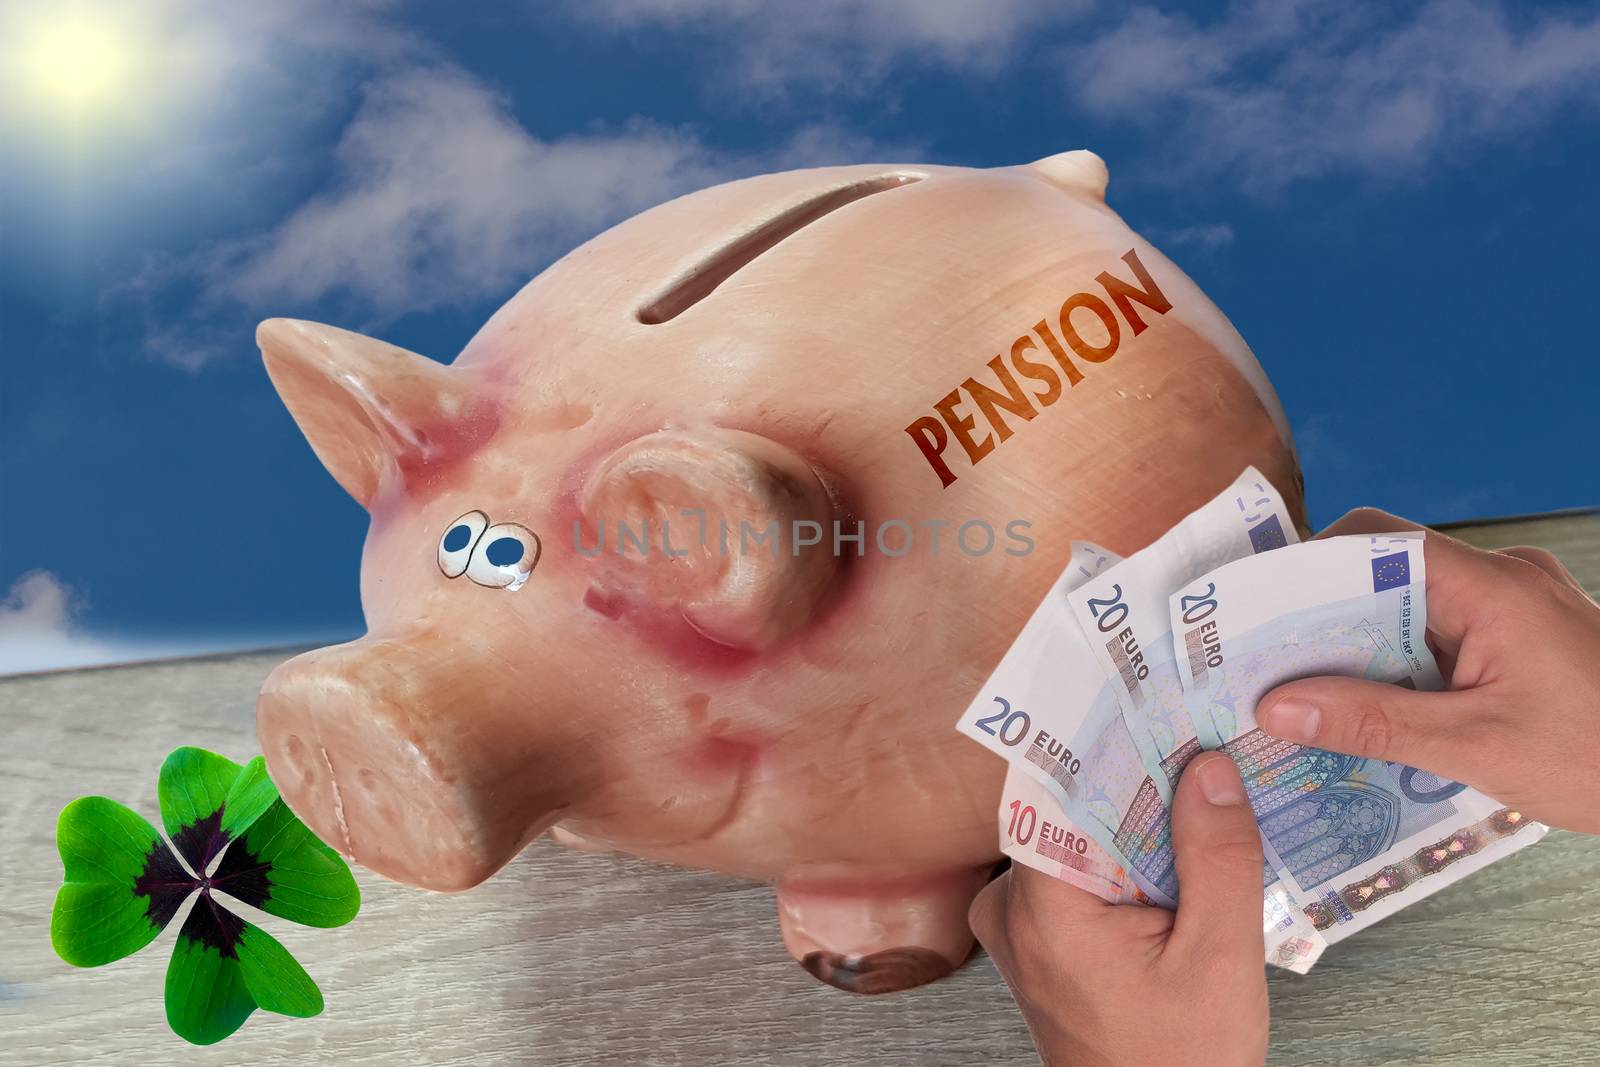 Piggy bank, lucky pig with lettering Pension stands on wooden surface in front of blue sky background.